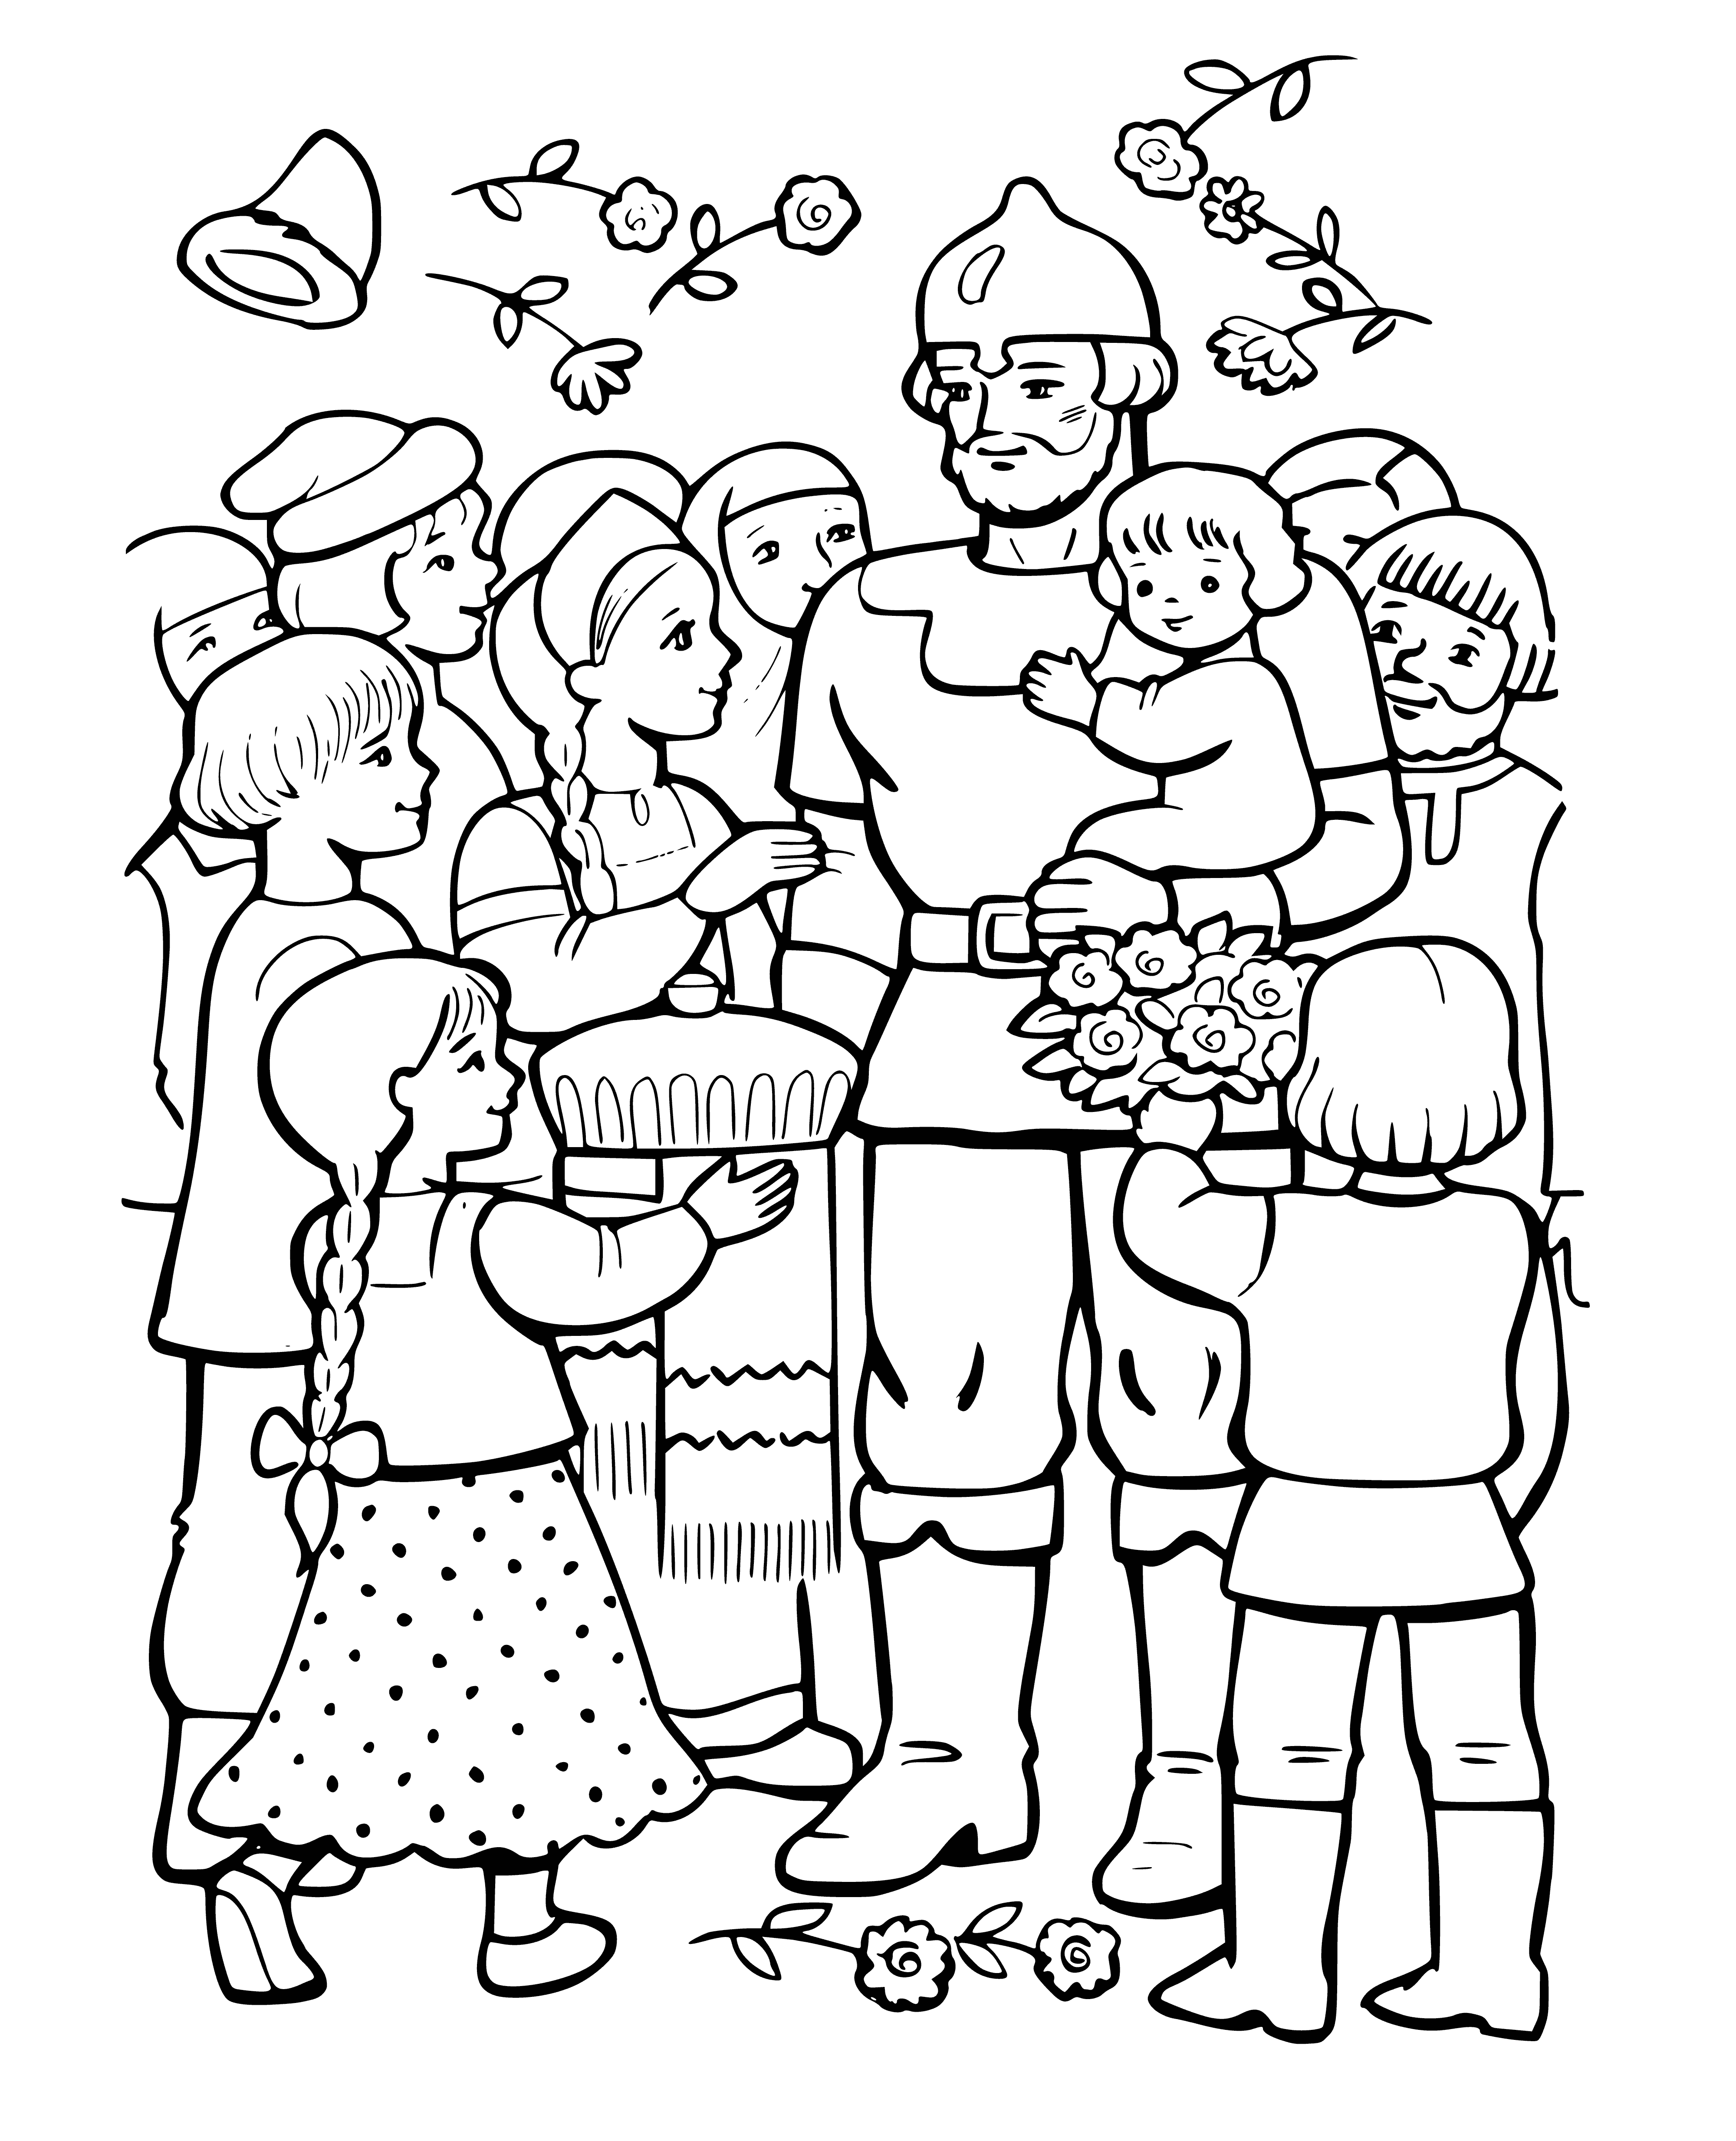 coloring page: Two children stand in snow, holding hands out to Ilya standing in doorway of a house, thanking him for something.